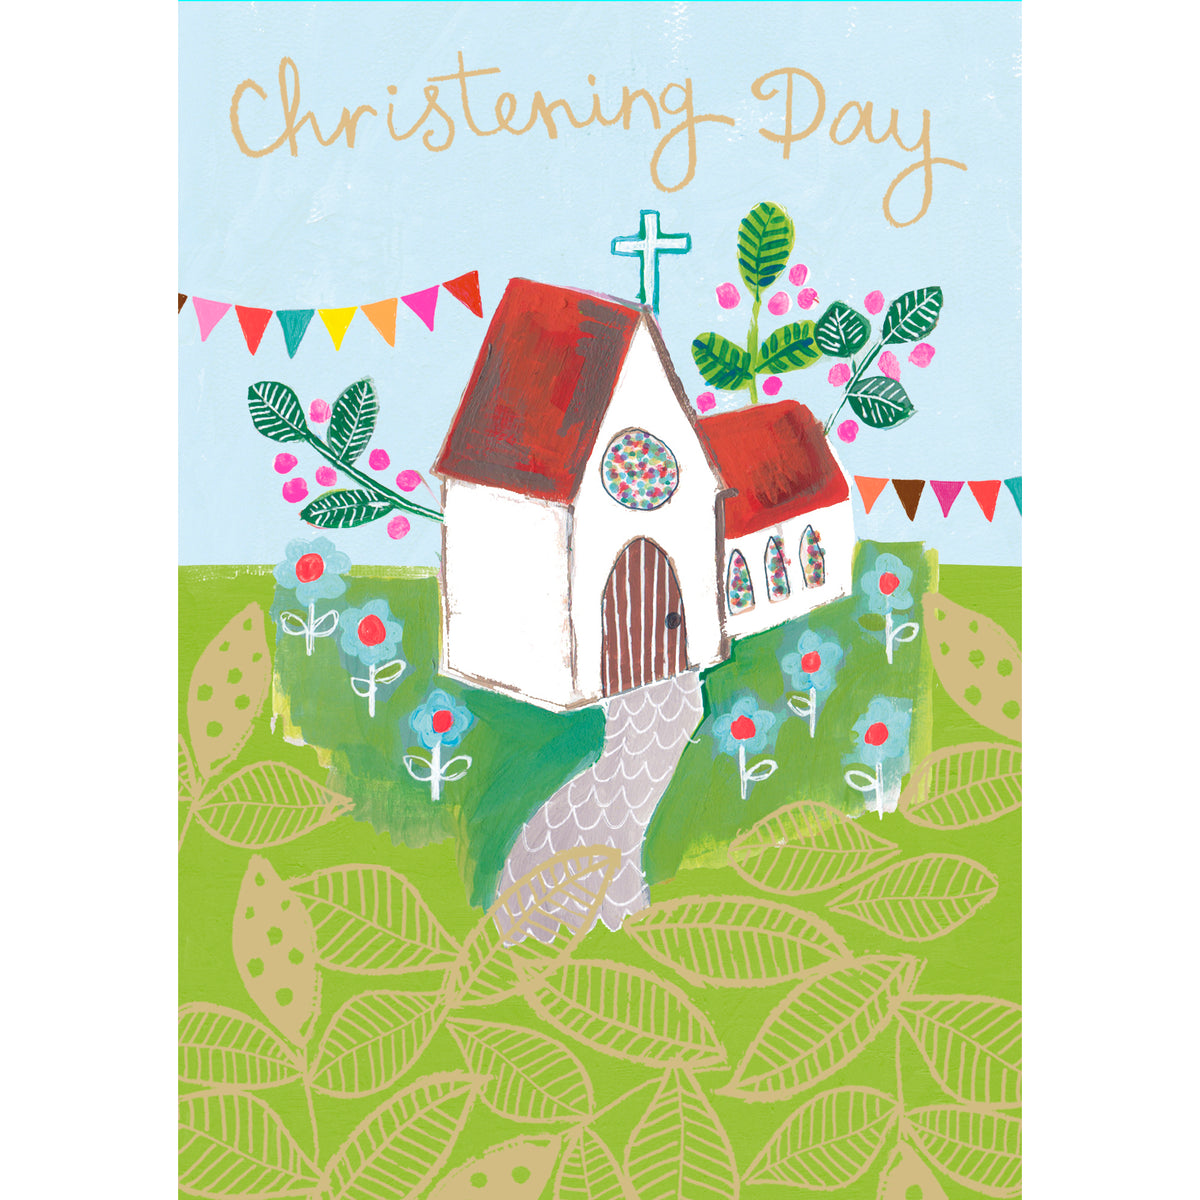 Painted Churchyard Christening Card from Penny Black